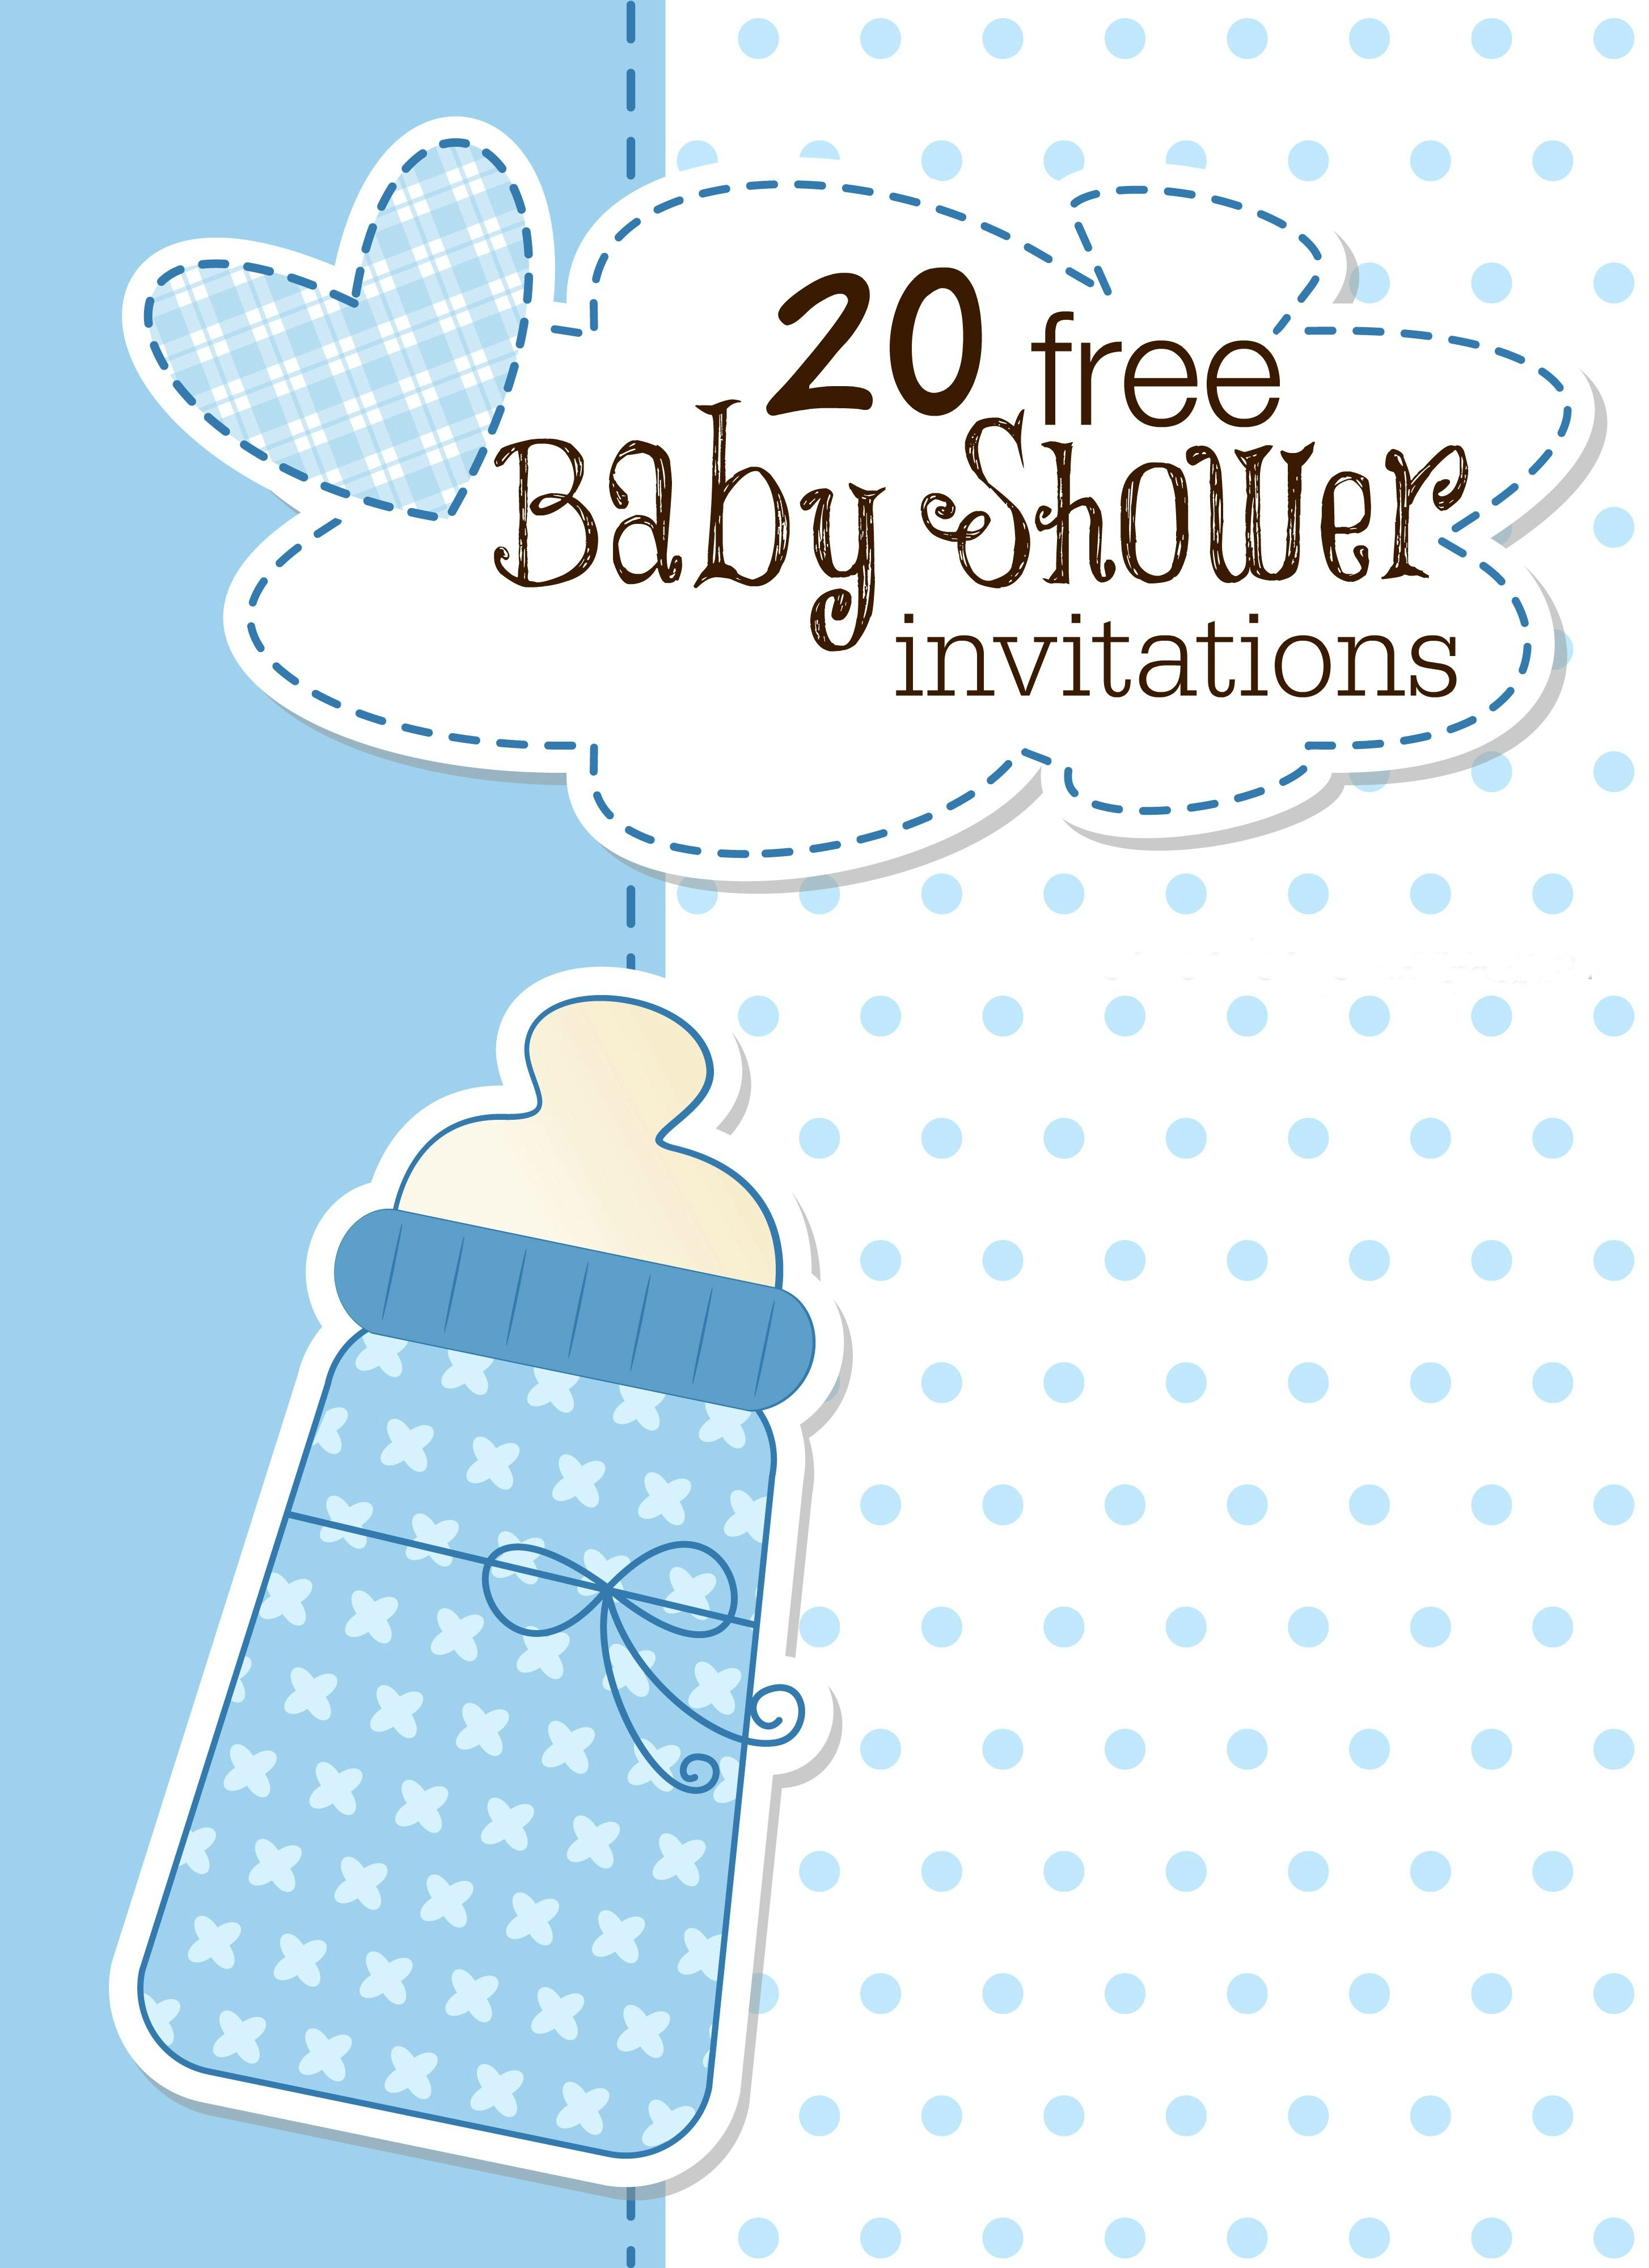 Are You Planning A Baby Shower? You&amp;#039;ll Find This List Of Free - Free Baby Boy Shower Invitations Printable